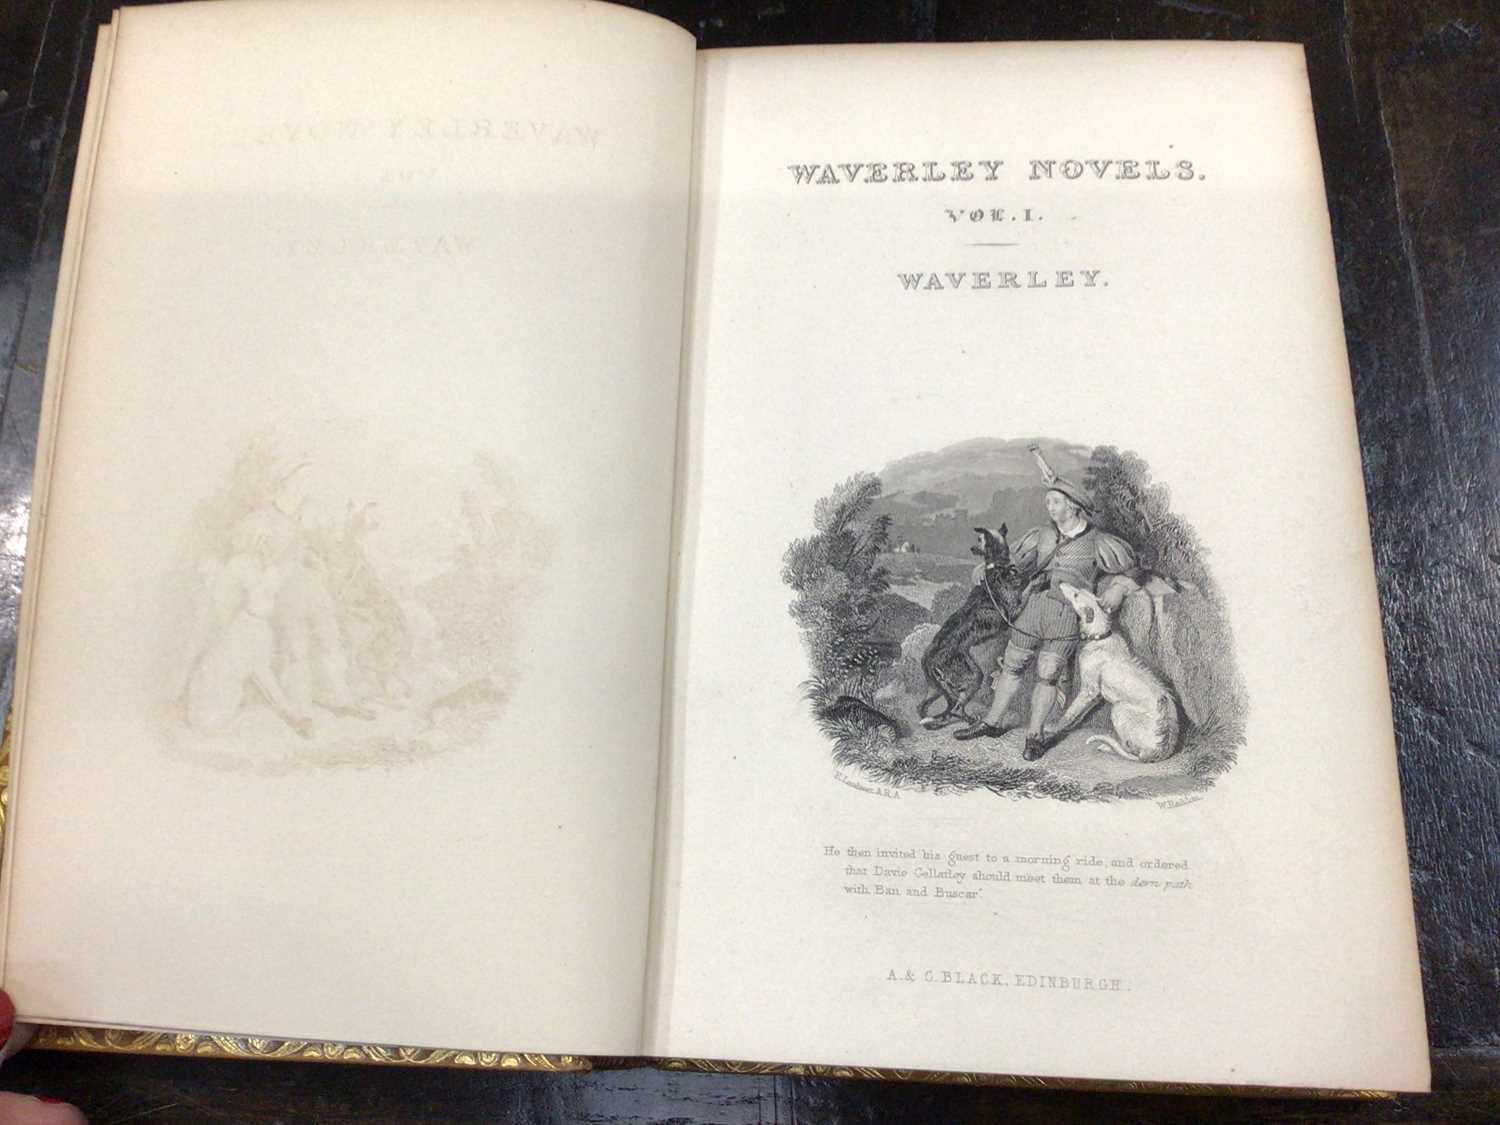 Sir Walter Scott, The Waverley Novels, published Adam and Charles Black 1865-1868, 48 volumes, all i - Image 6 of 11